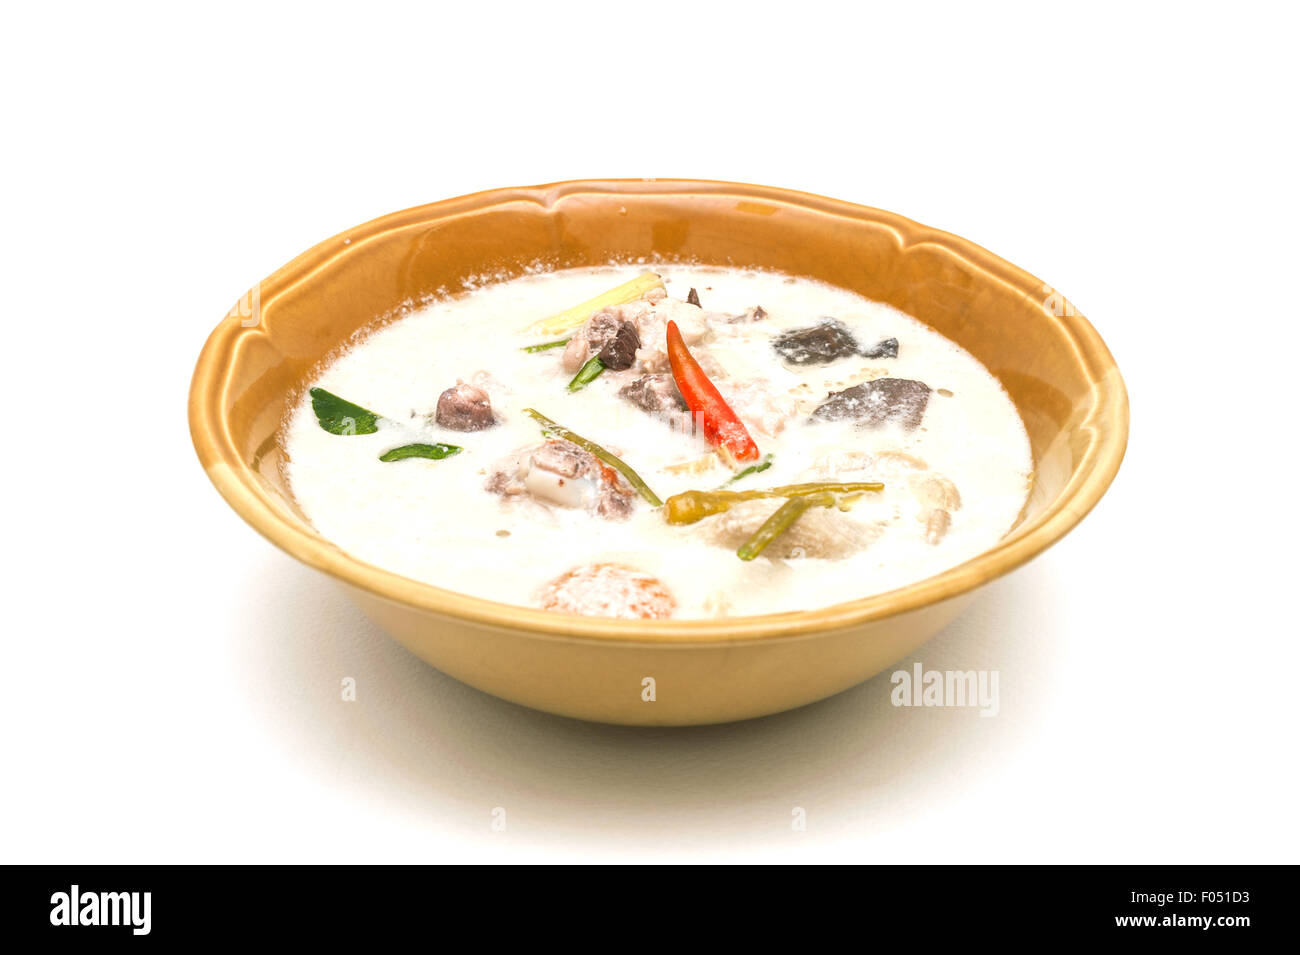 Soup made from coconut milk and vegetables on white background Stock Photo